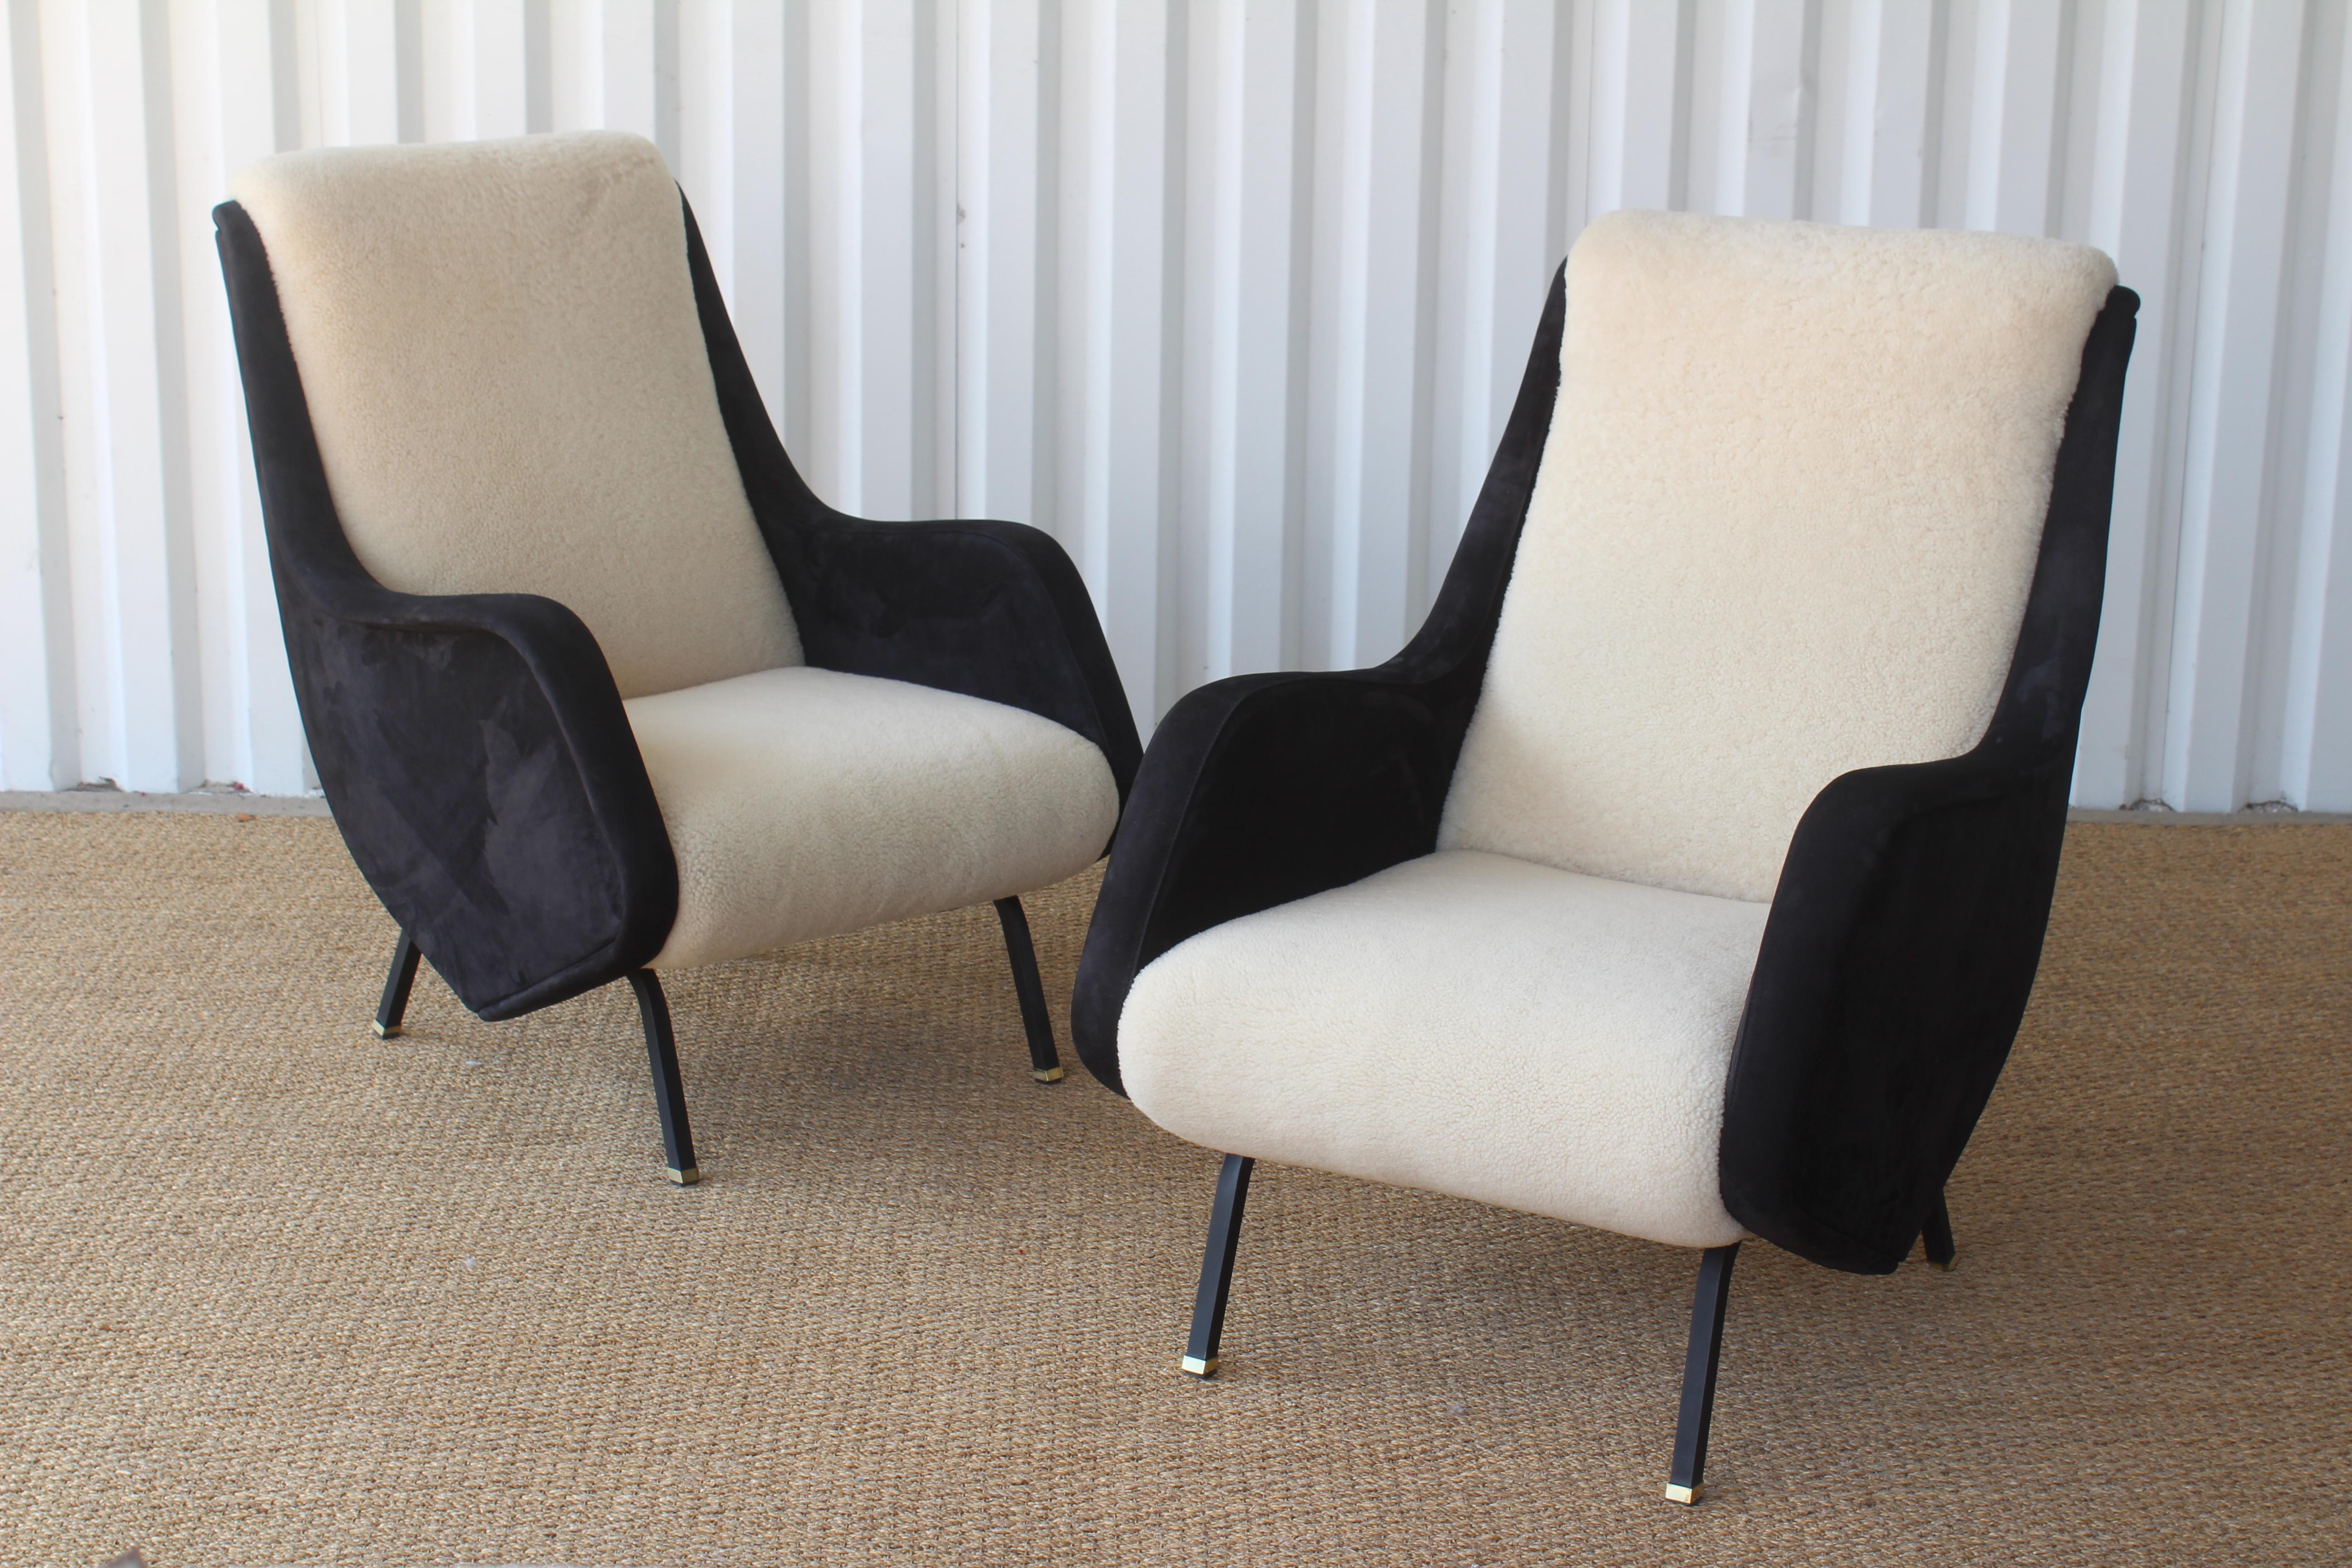 Mid-Century Modern Pair of Lounge Chairs by Aldo Morbelli for ISA Bergamo, Italy, 1950s